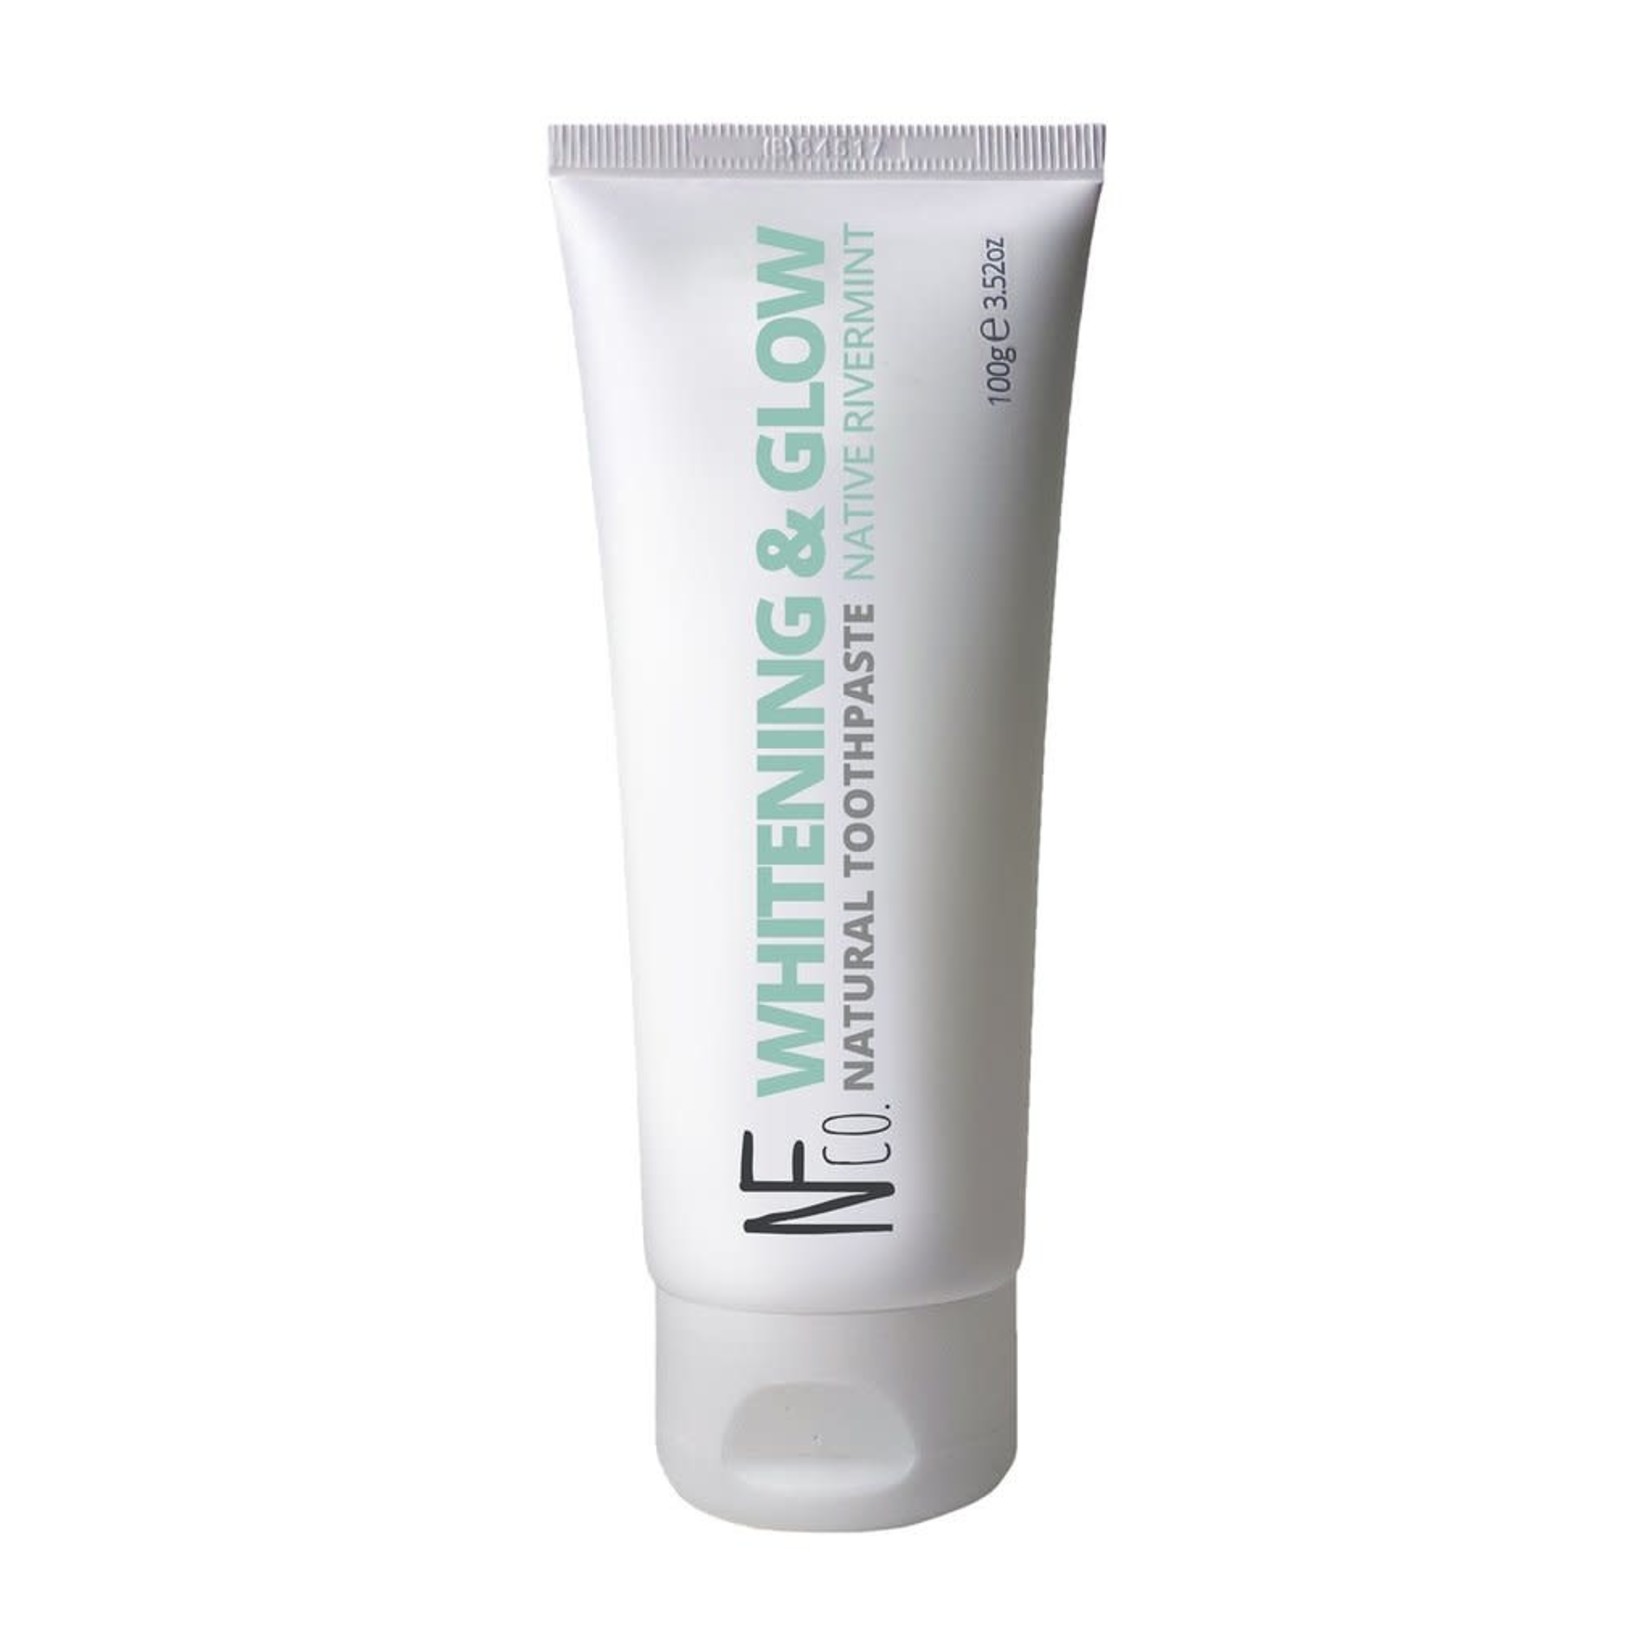 The NF Co. The Natural Family Co. Toothpaste Whitening & Glow